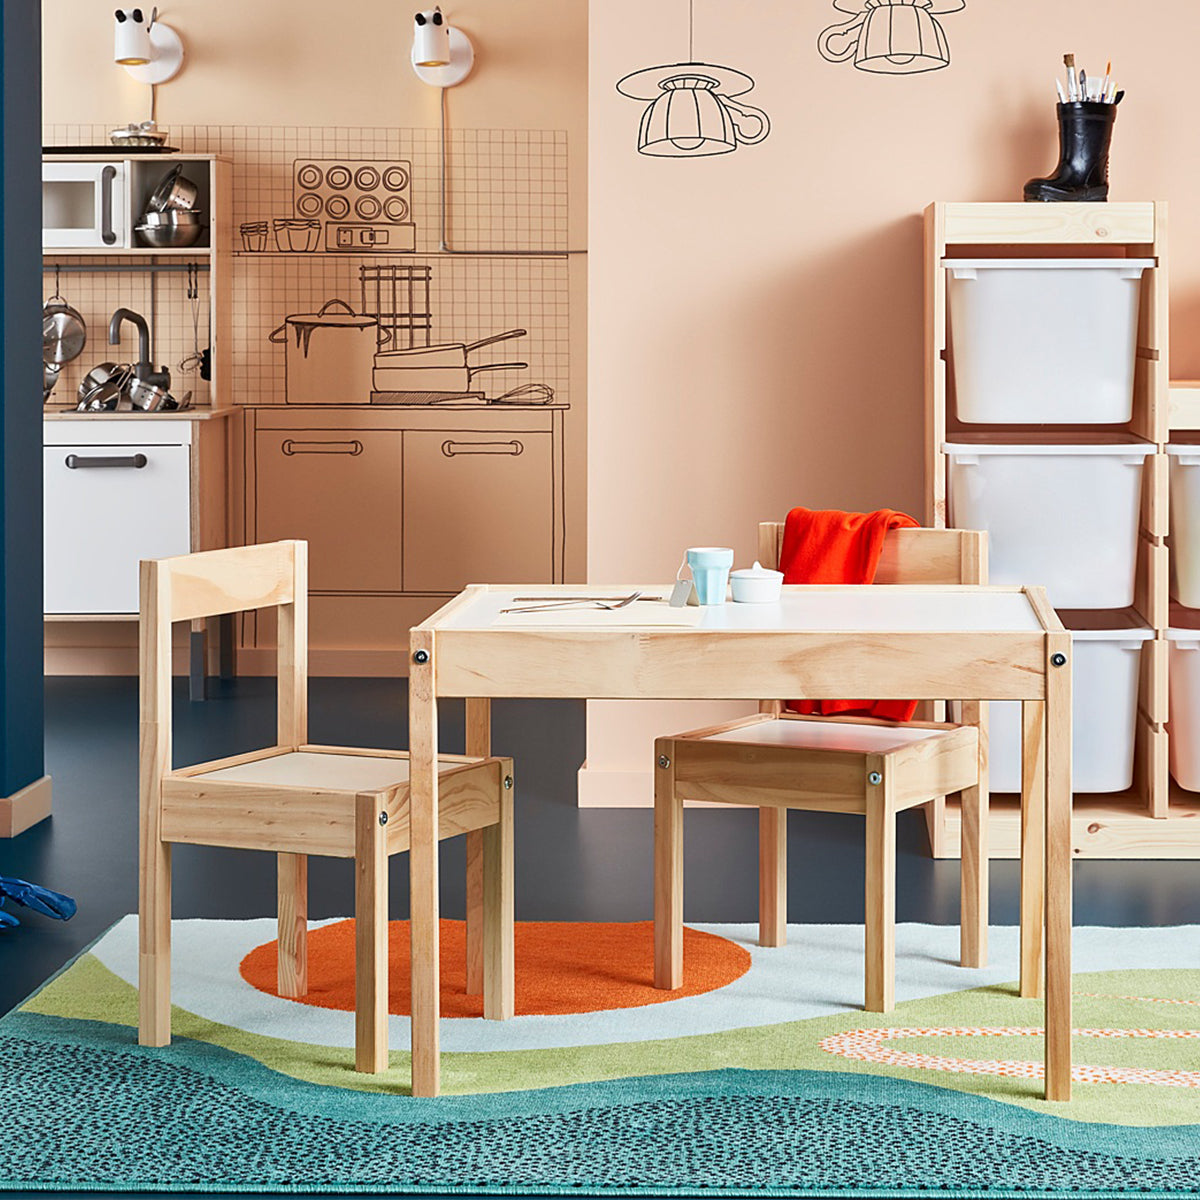 LÄTT Children's Table with 2 chairs